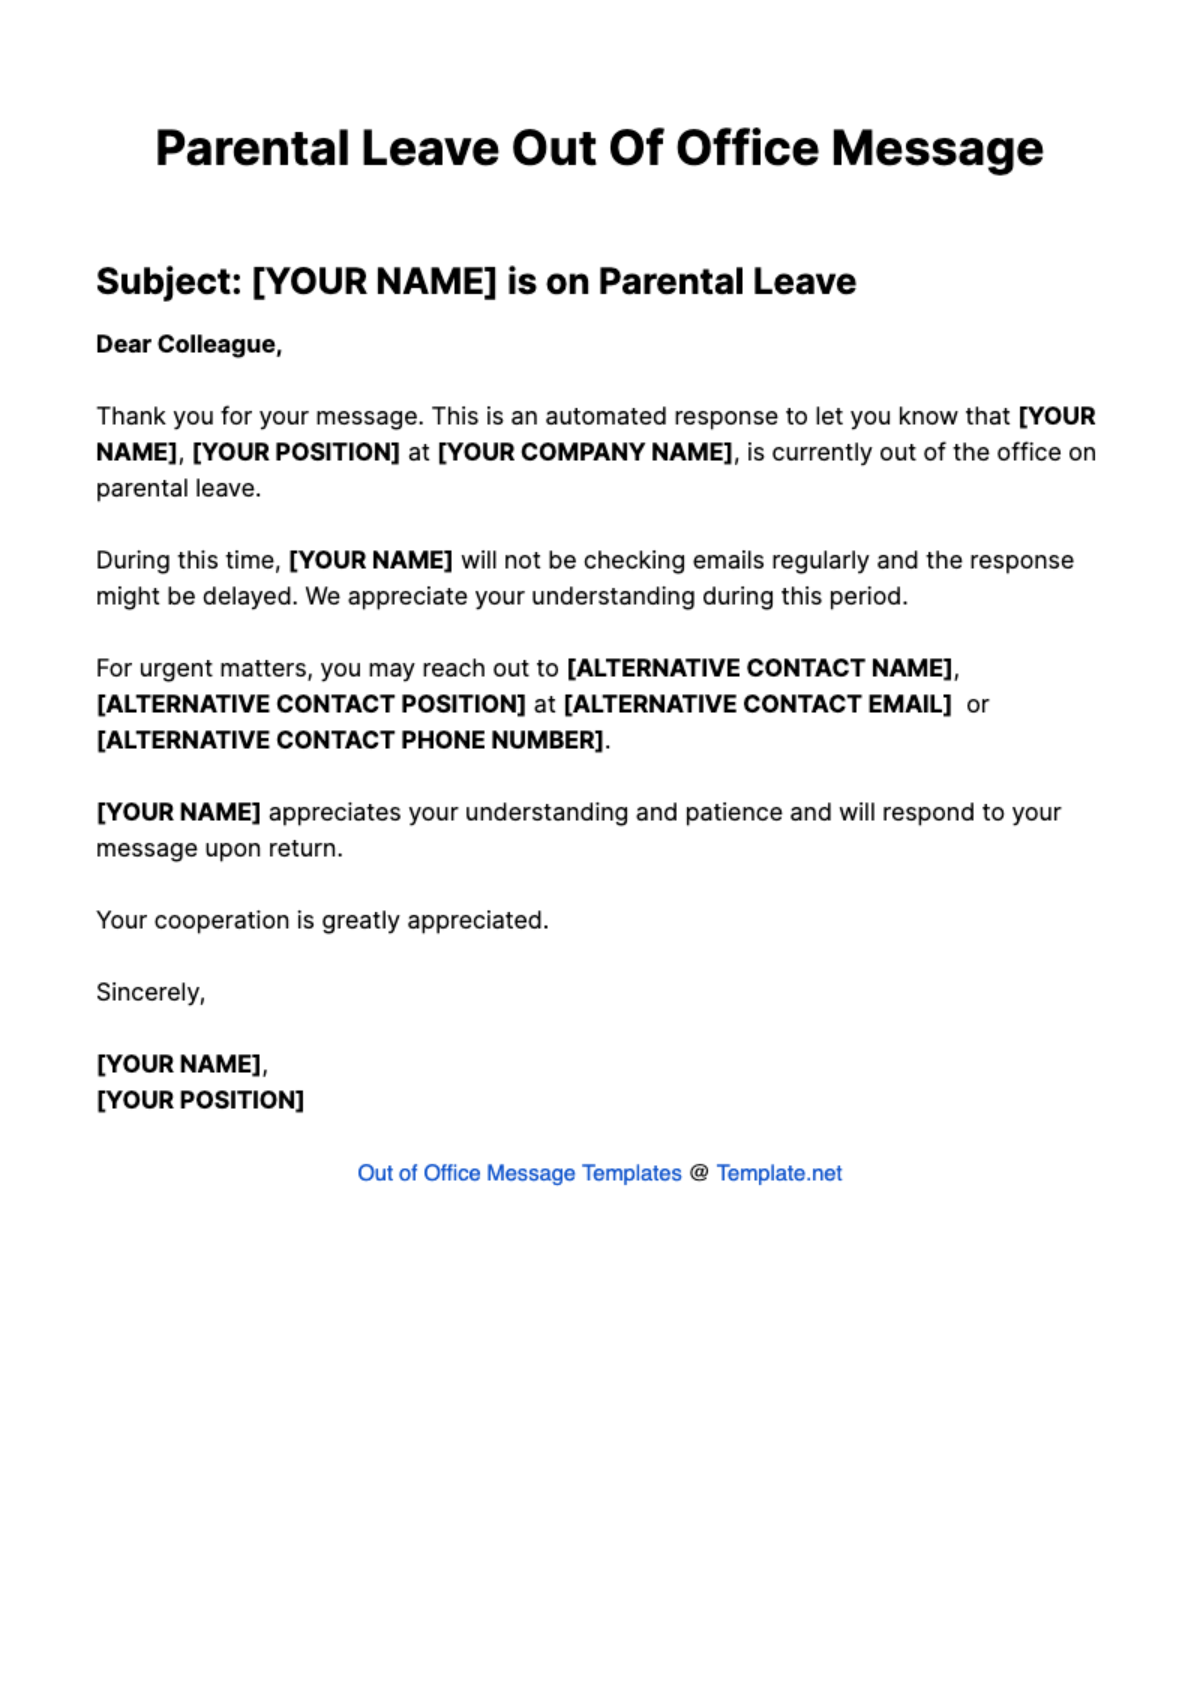 Parental Leave Out Of Office Message Template